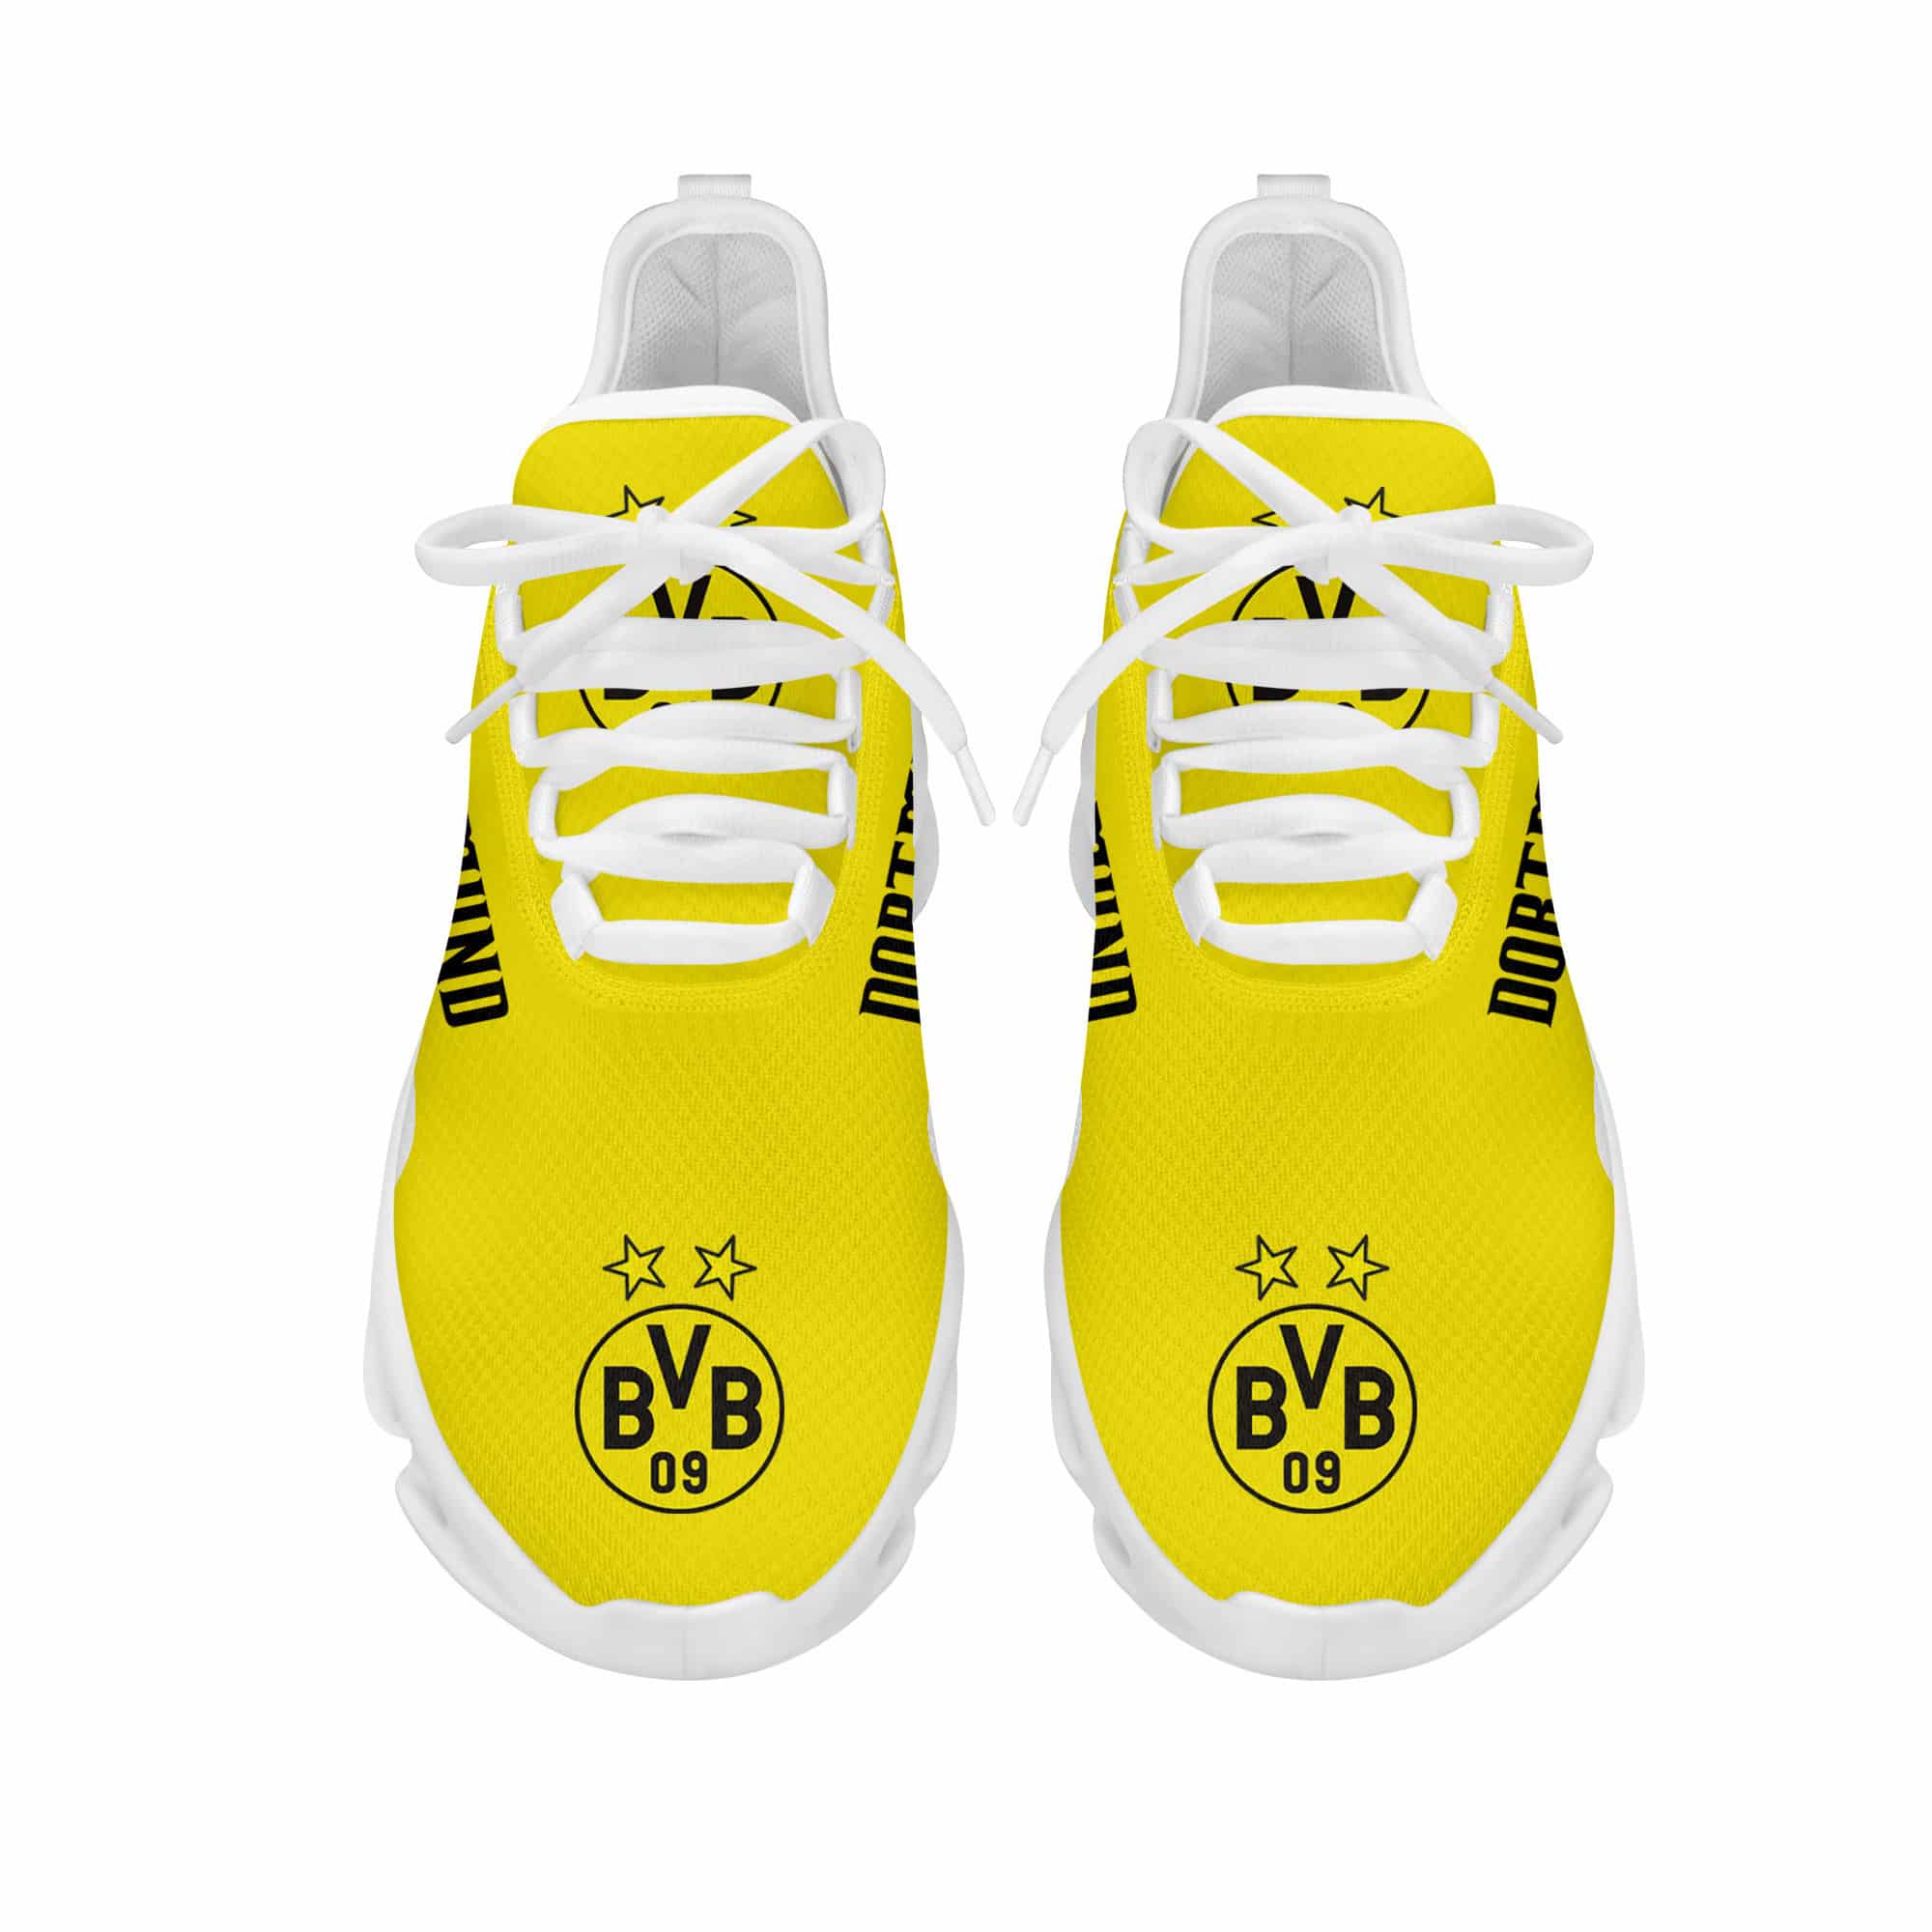 Borussia Dortmund Running Shoes Max Soul Shoes Sneakers Ver 1 4